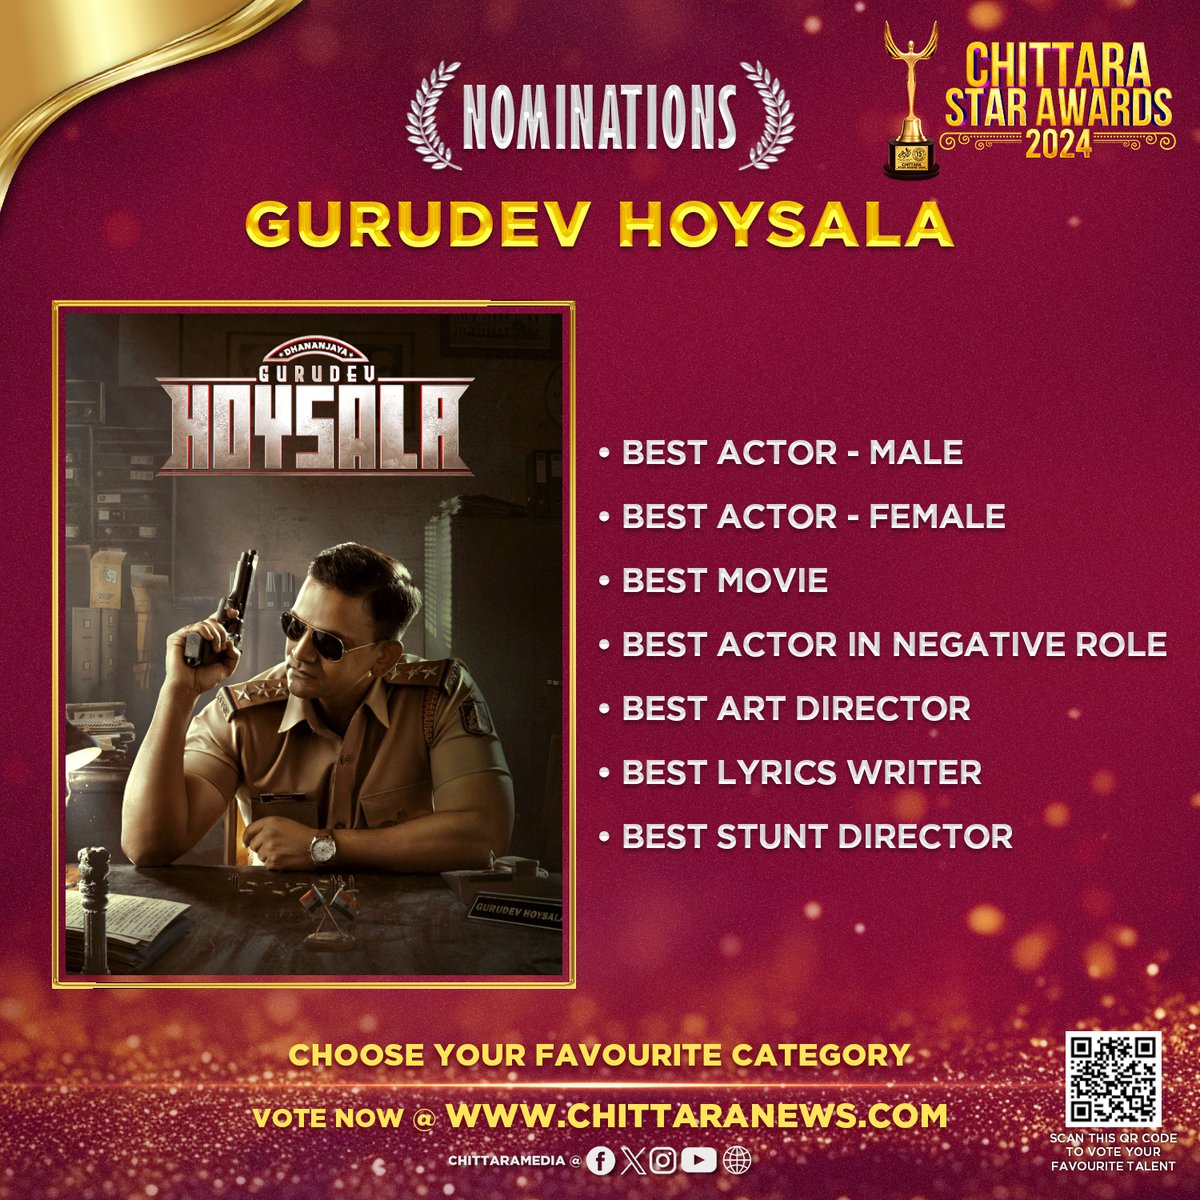 #GurudevHoysala 7 Nominations at #ChittaraStarAwards2024 Global Voting is Now Live : awards.chittaranews.com/poll/780/ Vote now and show your love for Team #GurudevHoysala #ChittaraStarAwards2024 #CSA2024